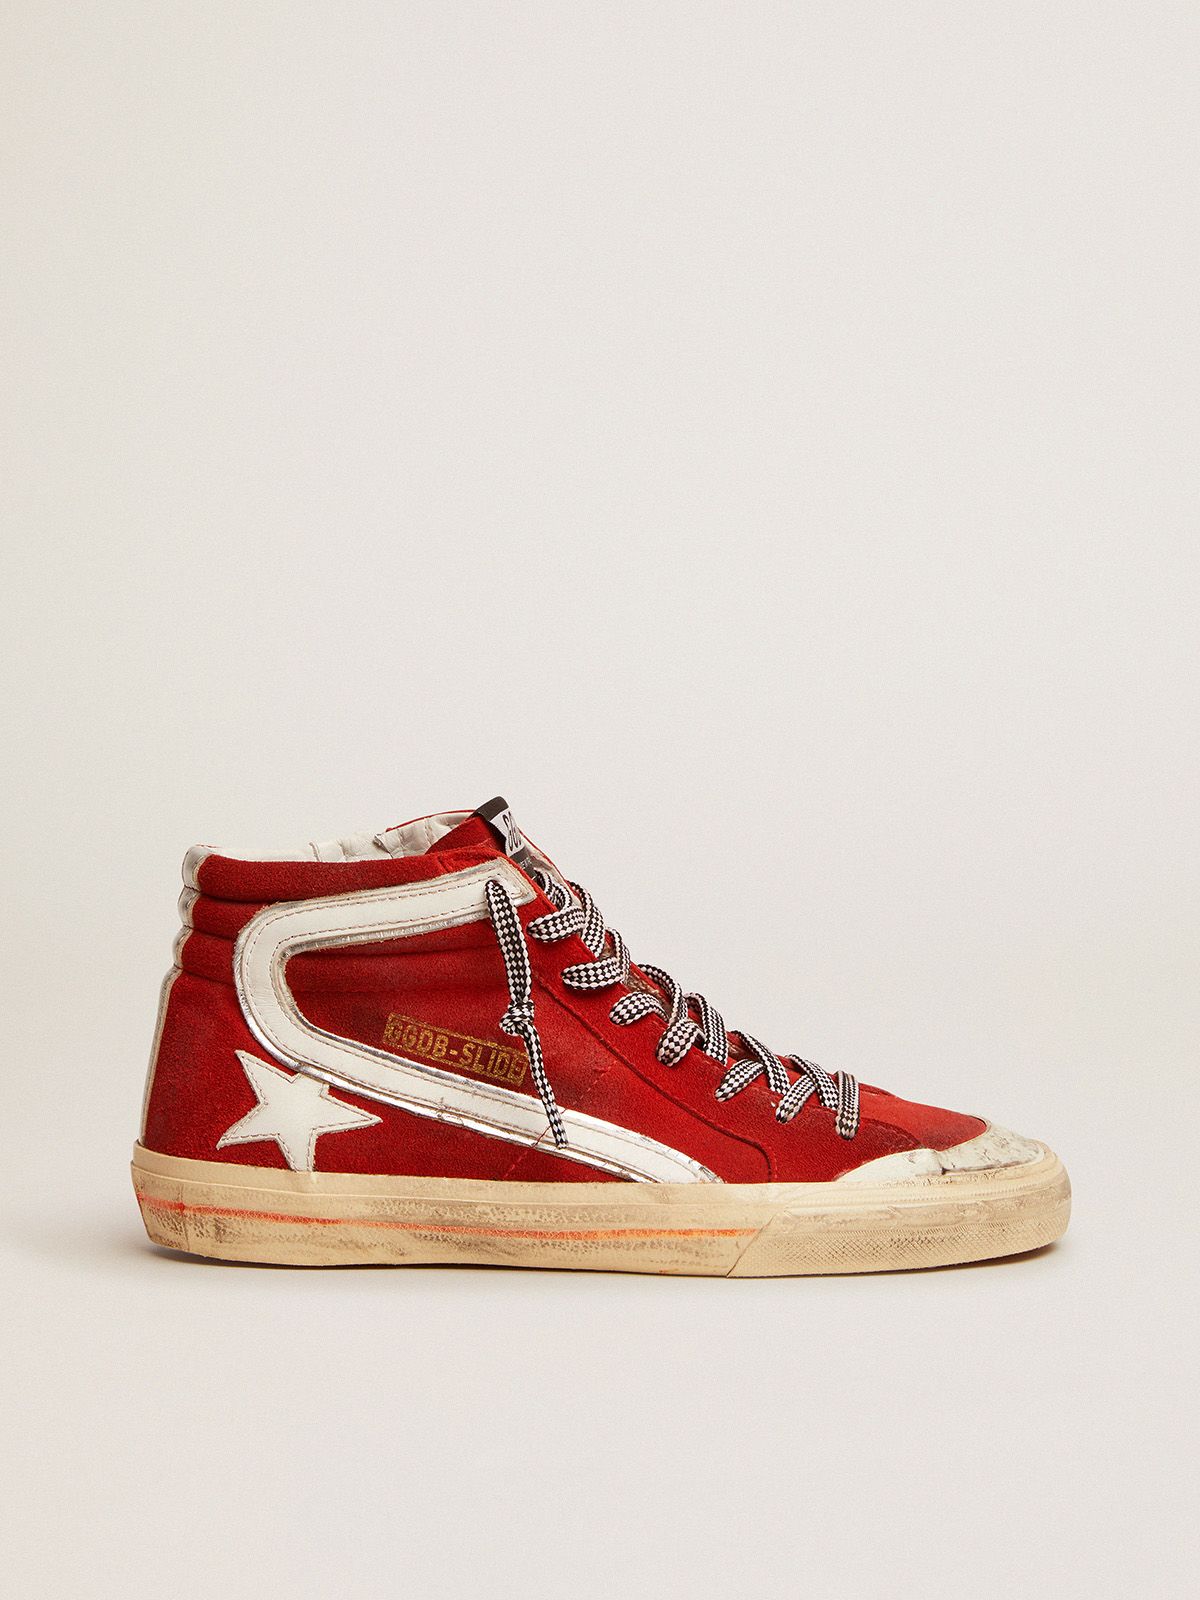 golden goose in red details white sneakers Penstar Slide with suede